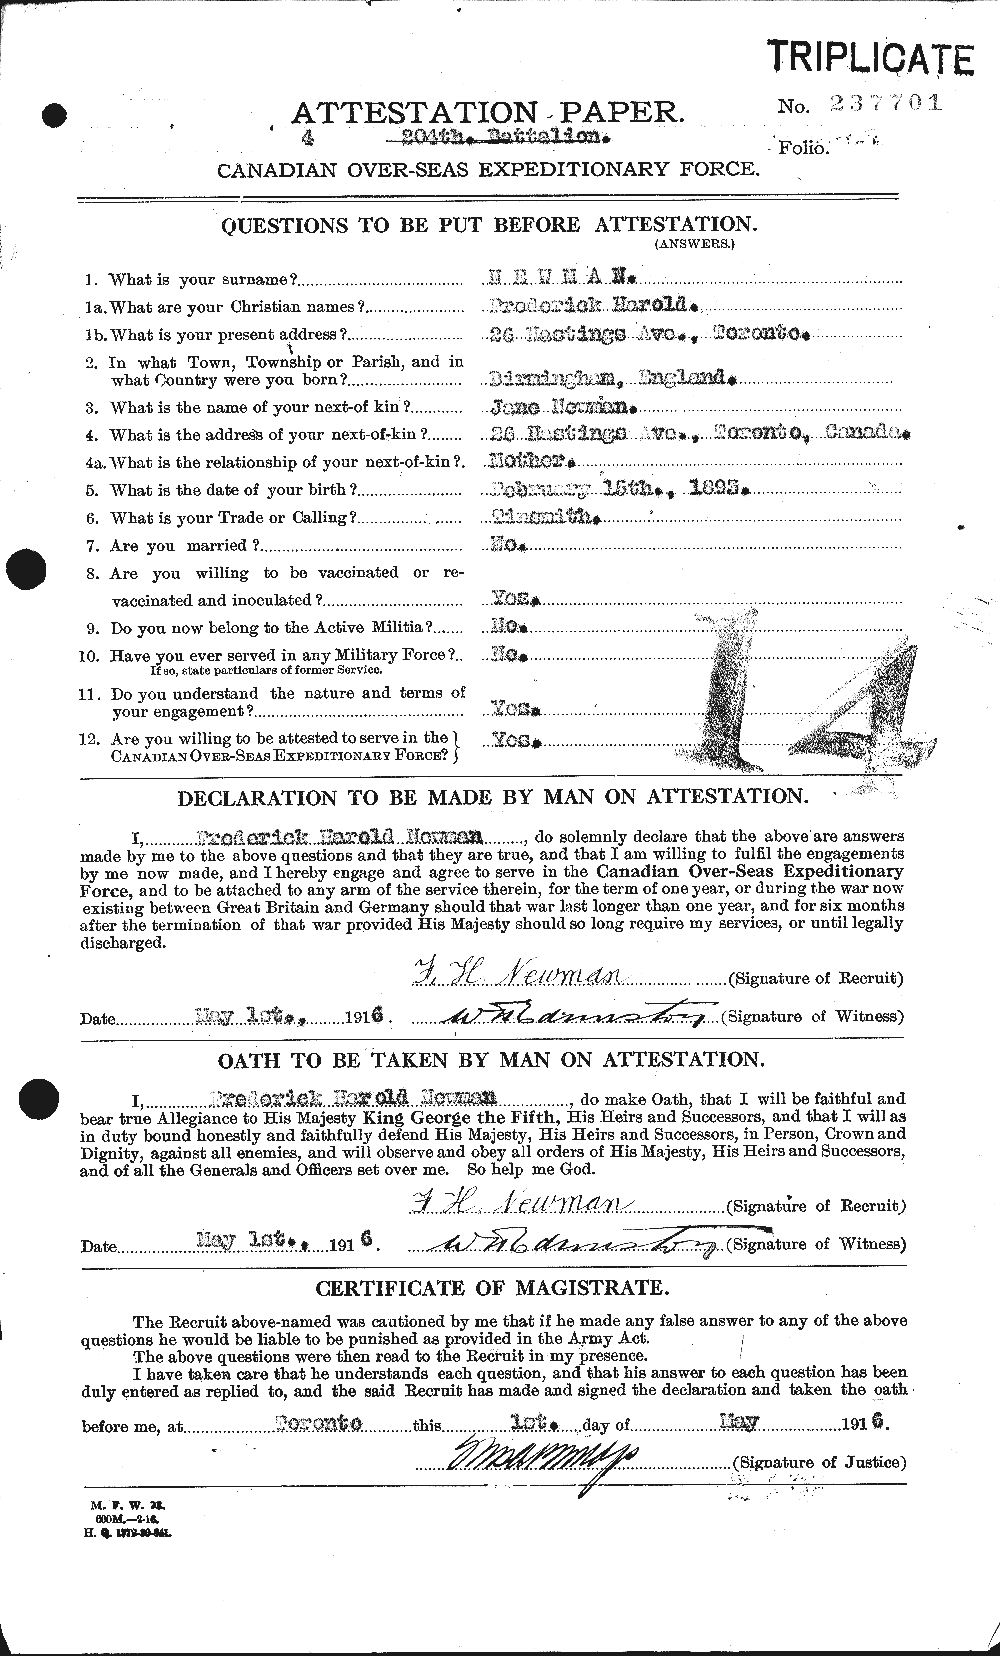 Personnel Records of the First World War - CEF 548076a